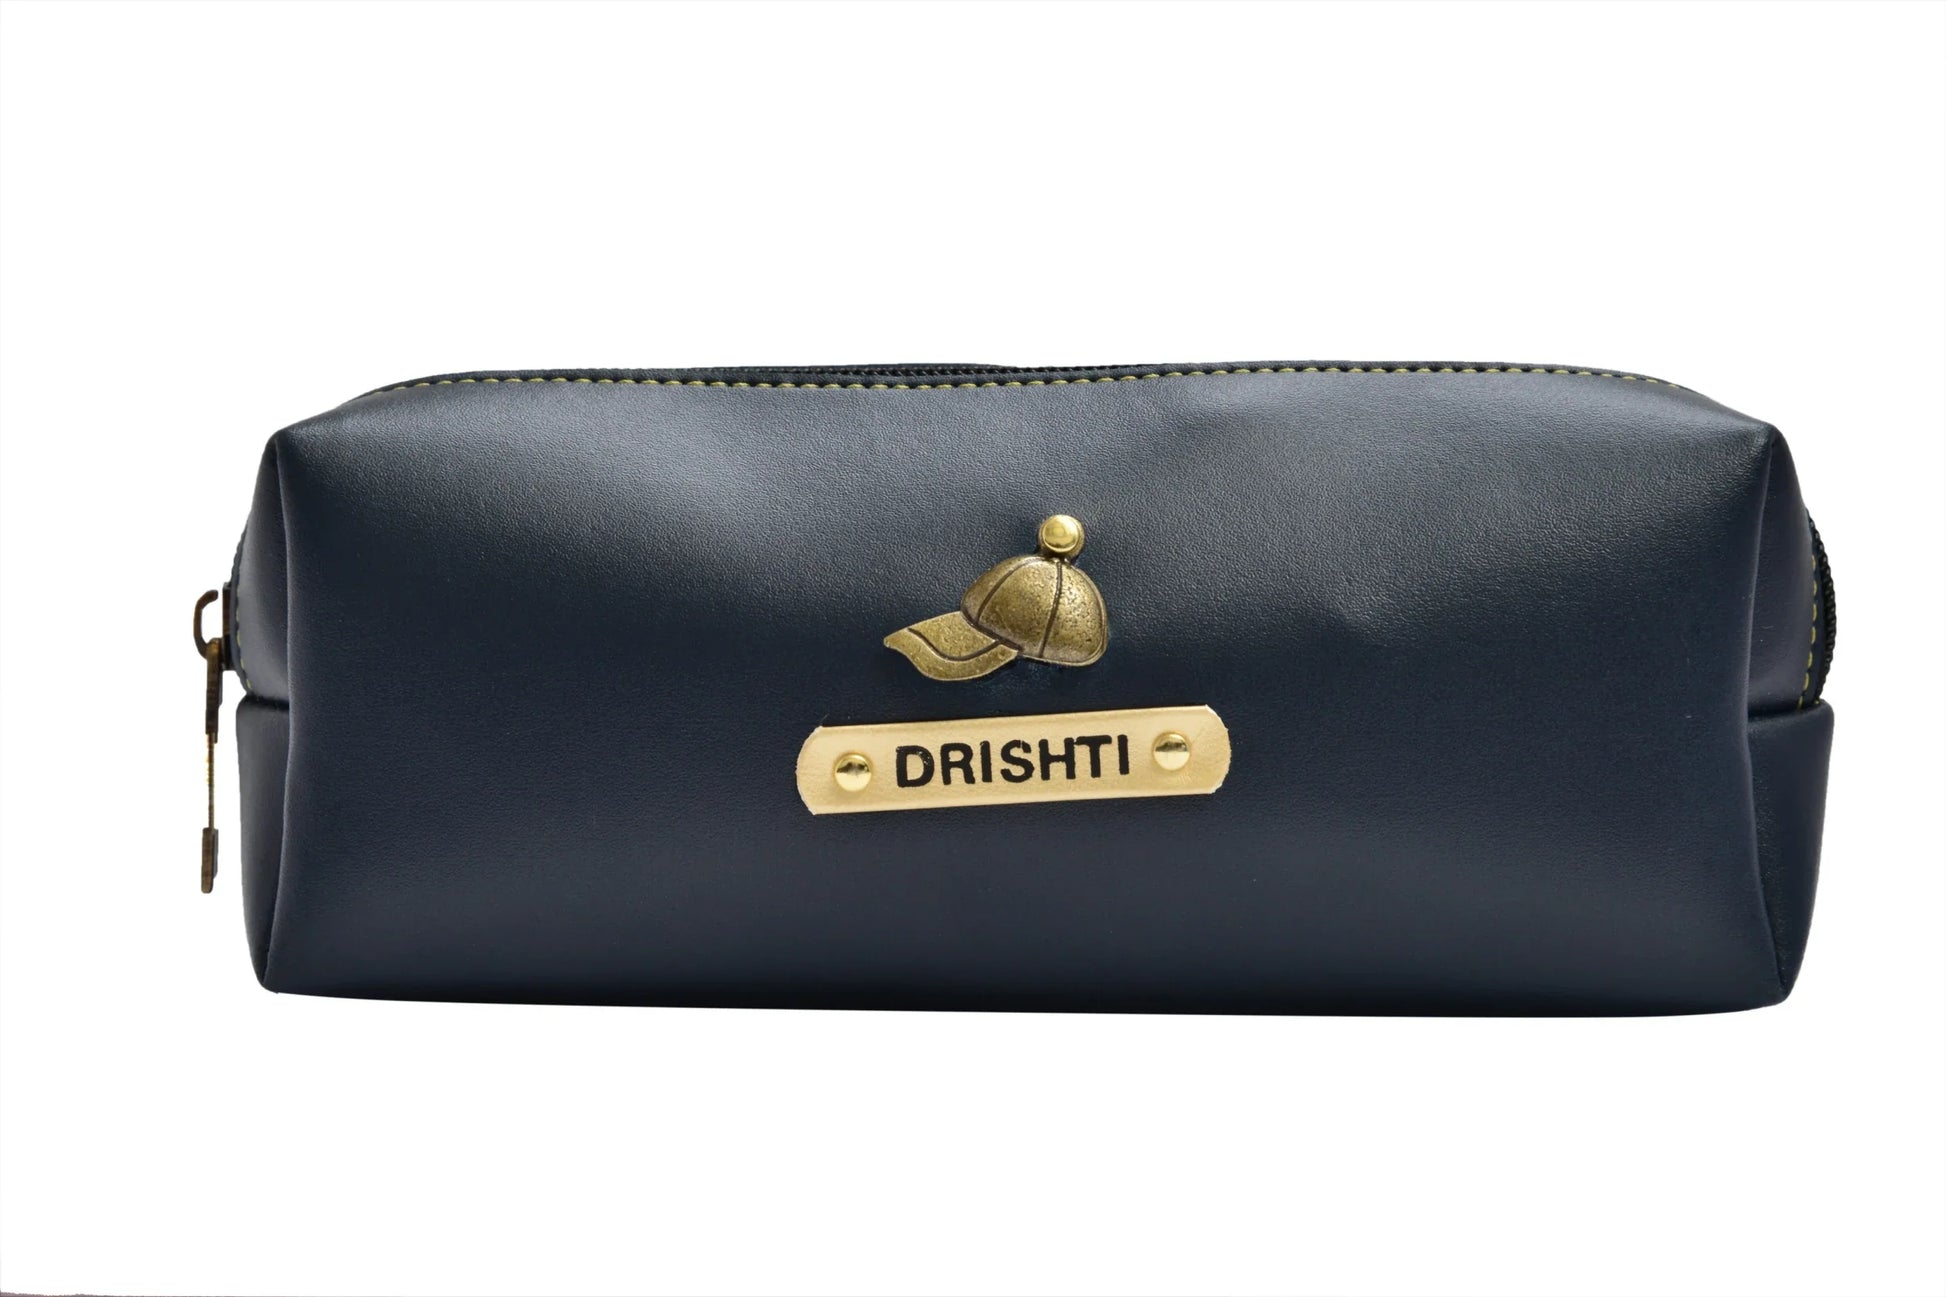 "Professional and Polished: Our pencil pouch is a professional companion for the office, helping you maintain a sleek and organized workspace."